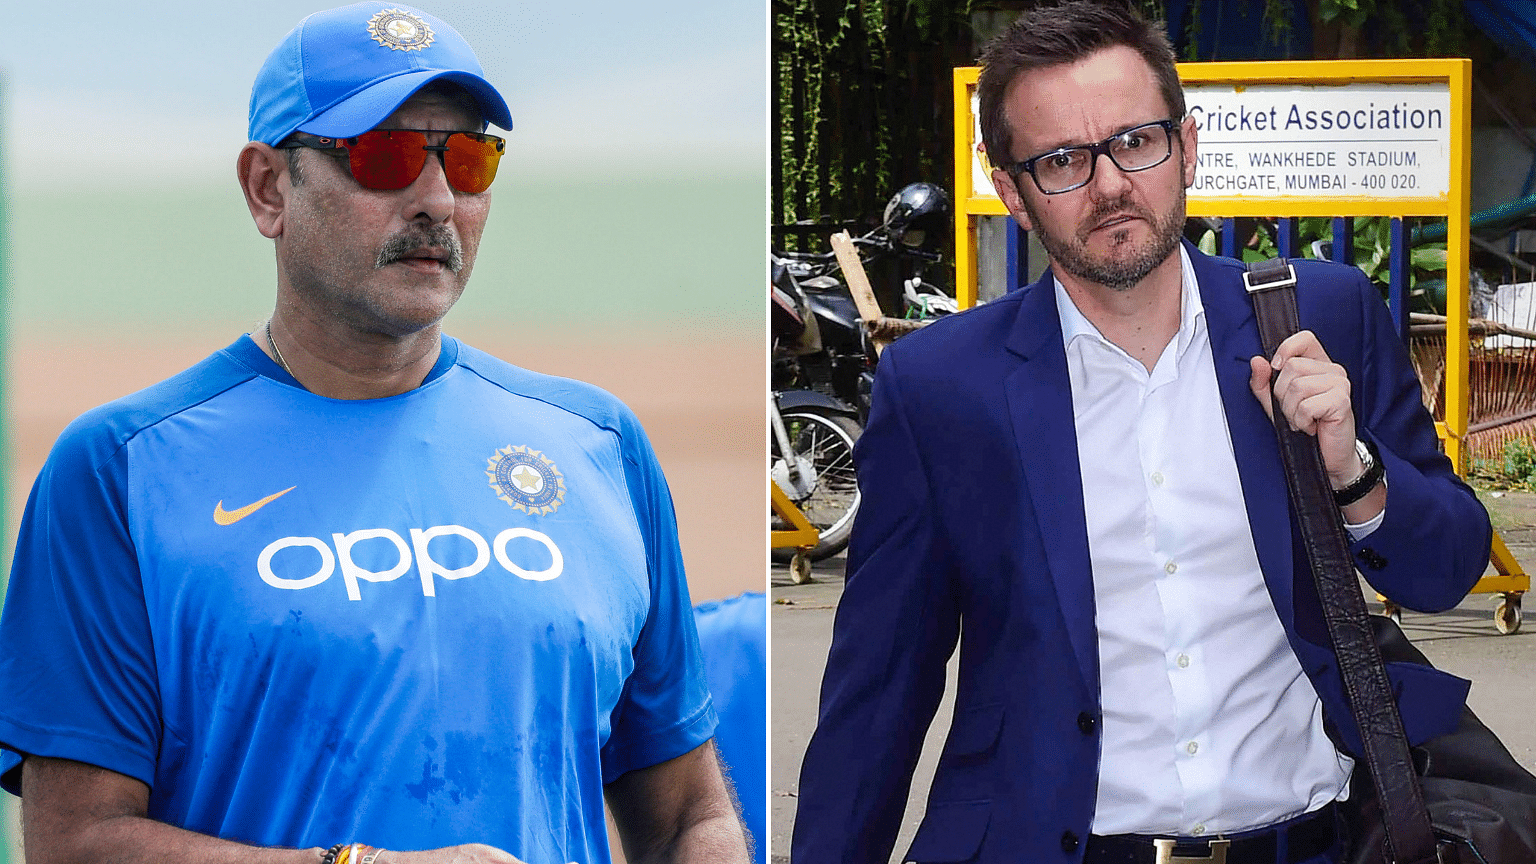 On Friday, incumbent Ravi Shastri (left) pipped Mike Hesson for the post of Team India Head Coach.